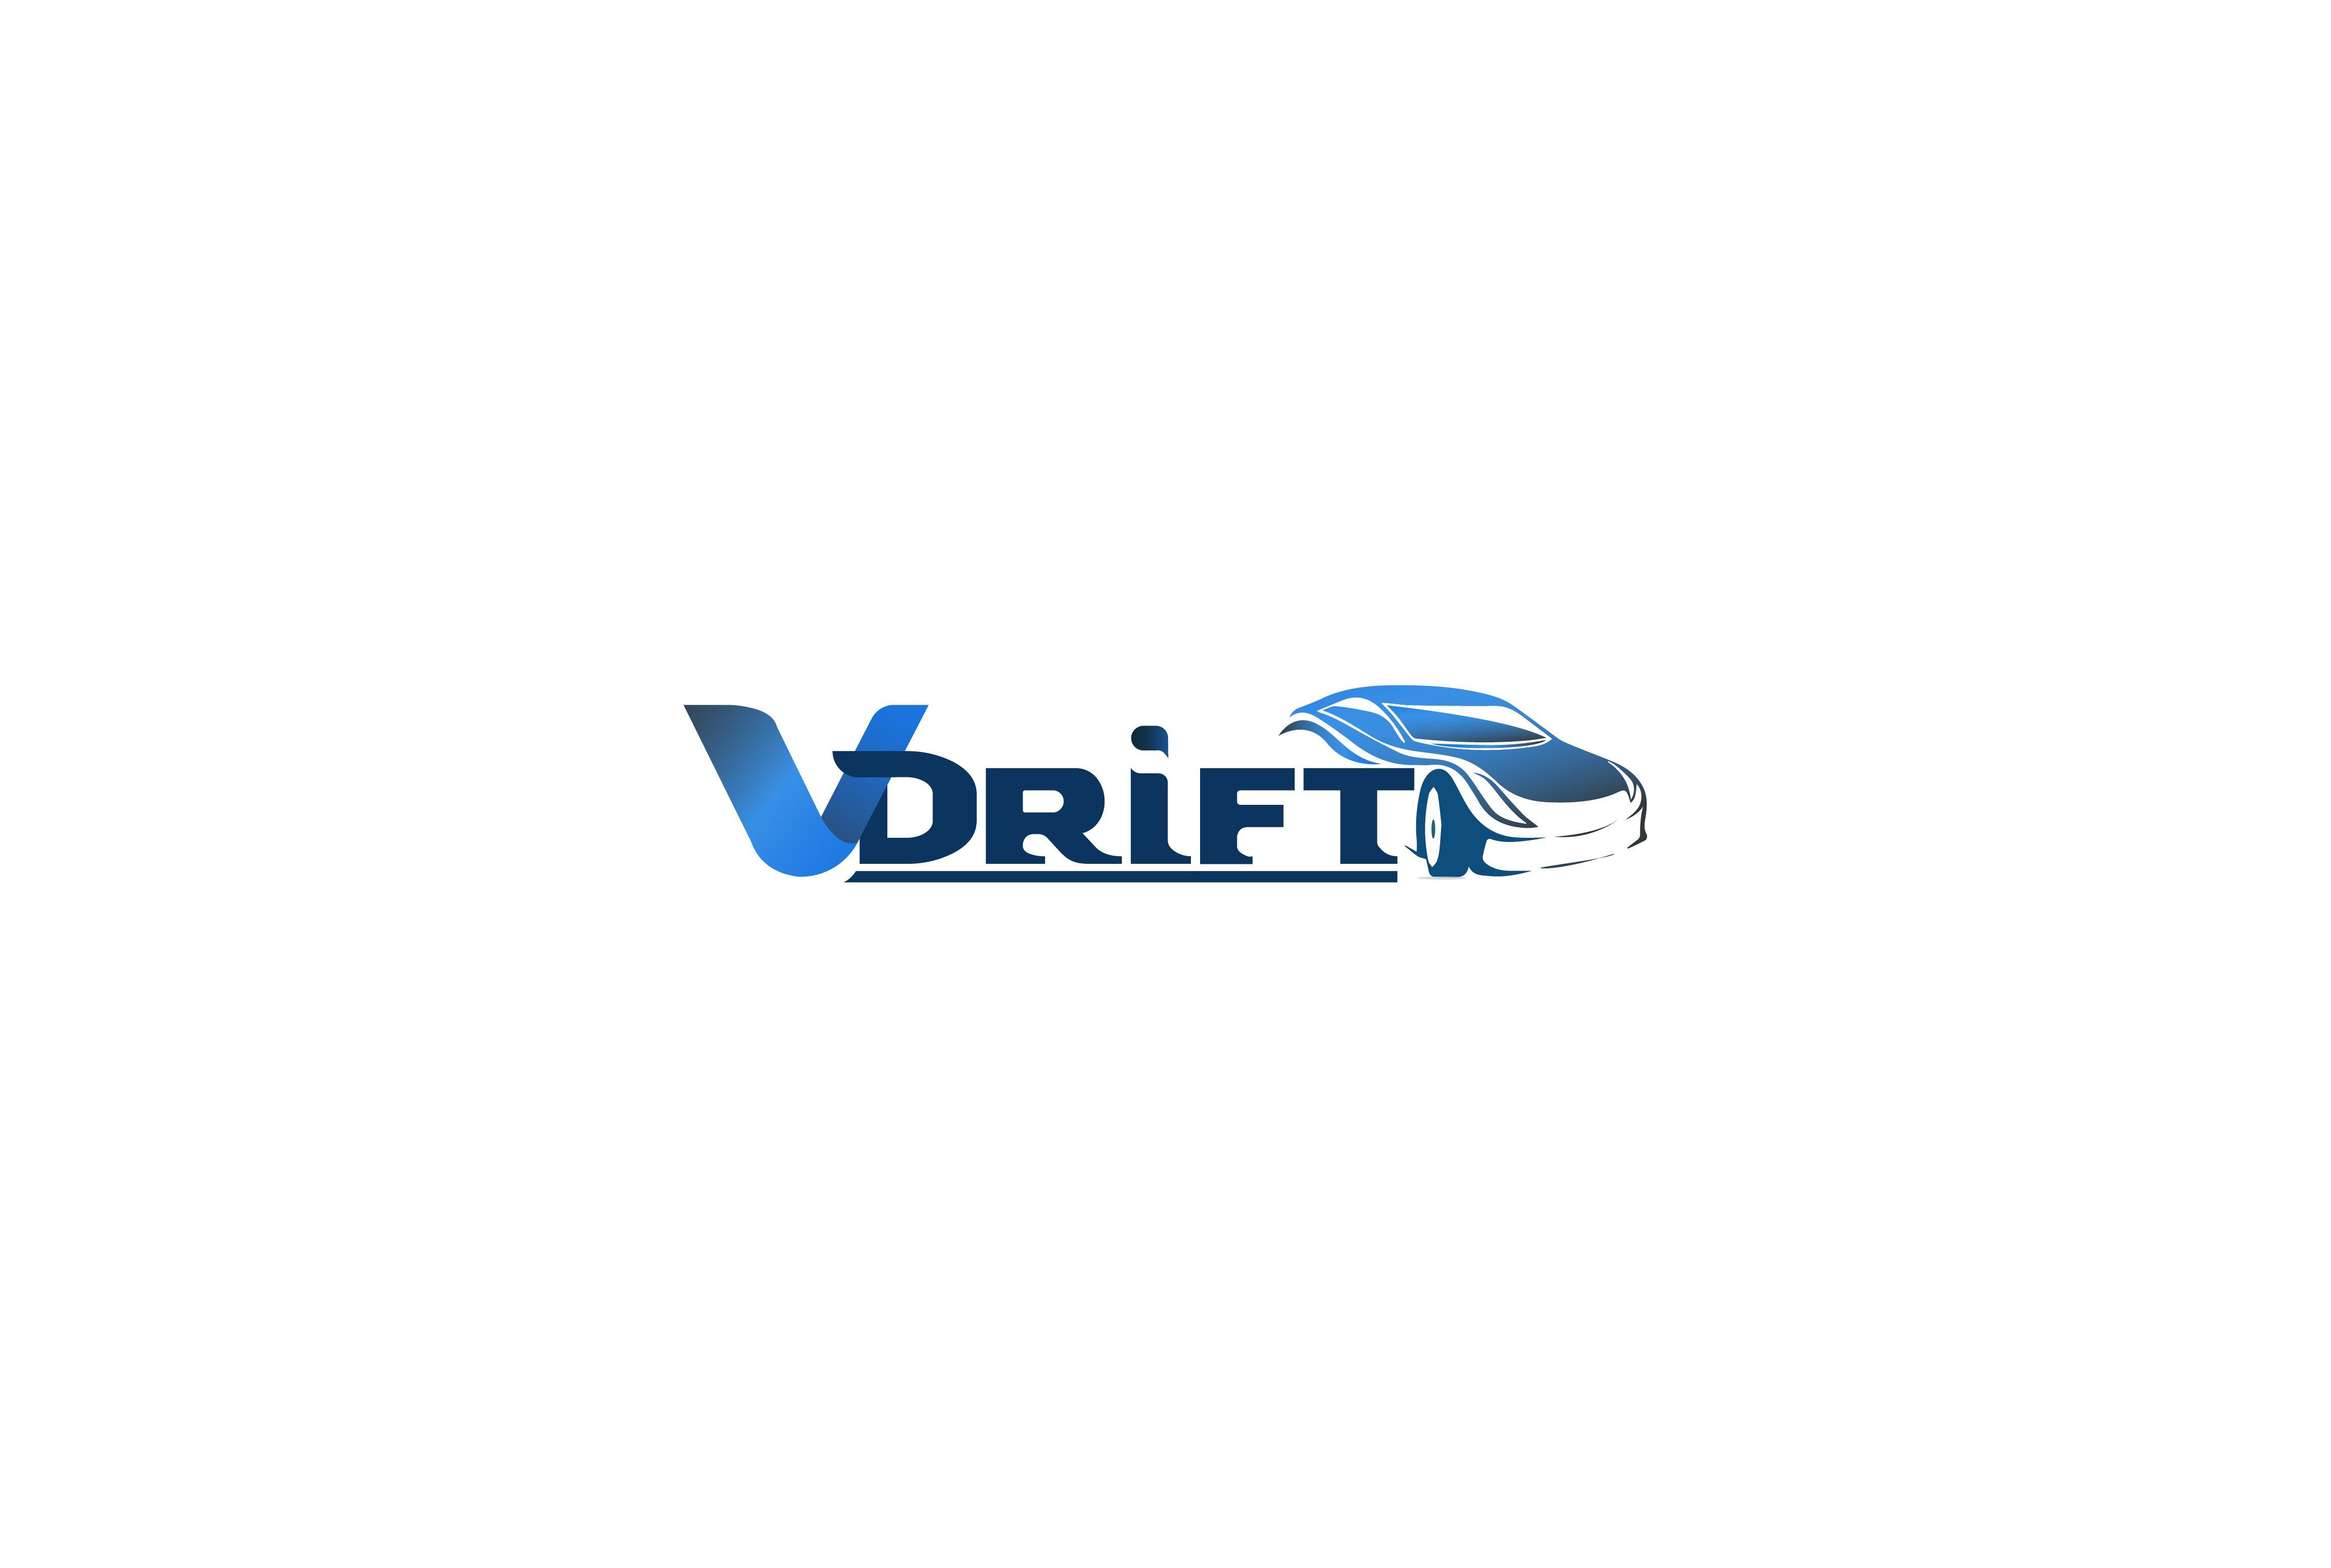 CC Game Logo - My Proposed logo for the open source game VDrift, made by Adobe ...